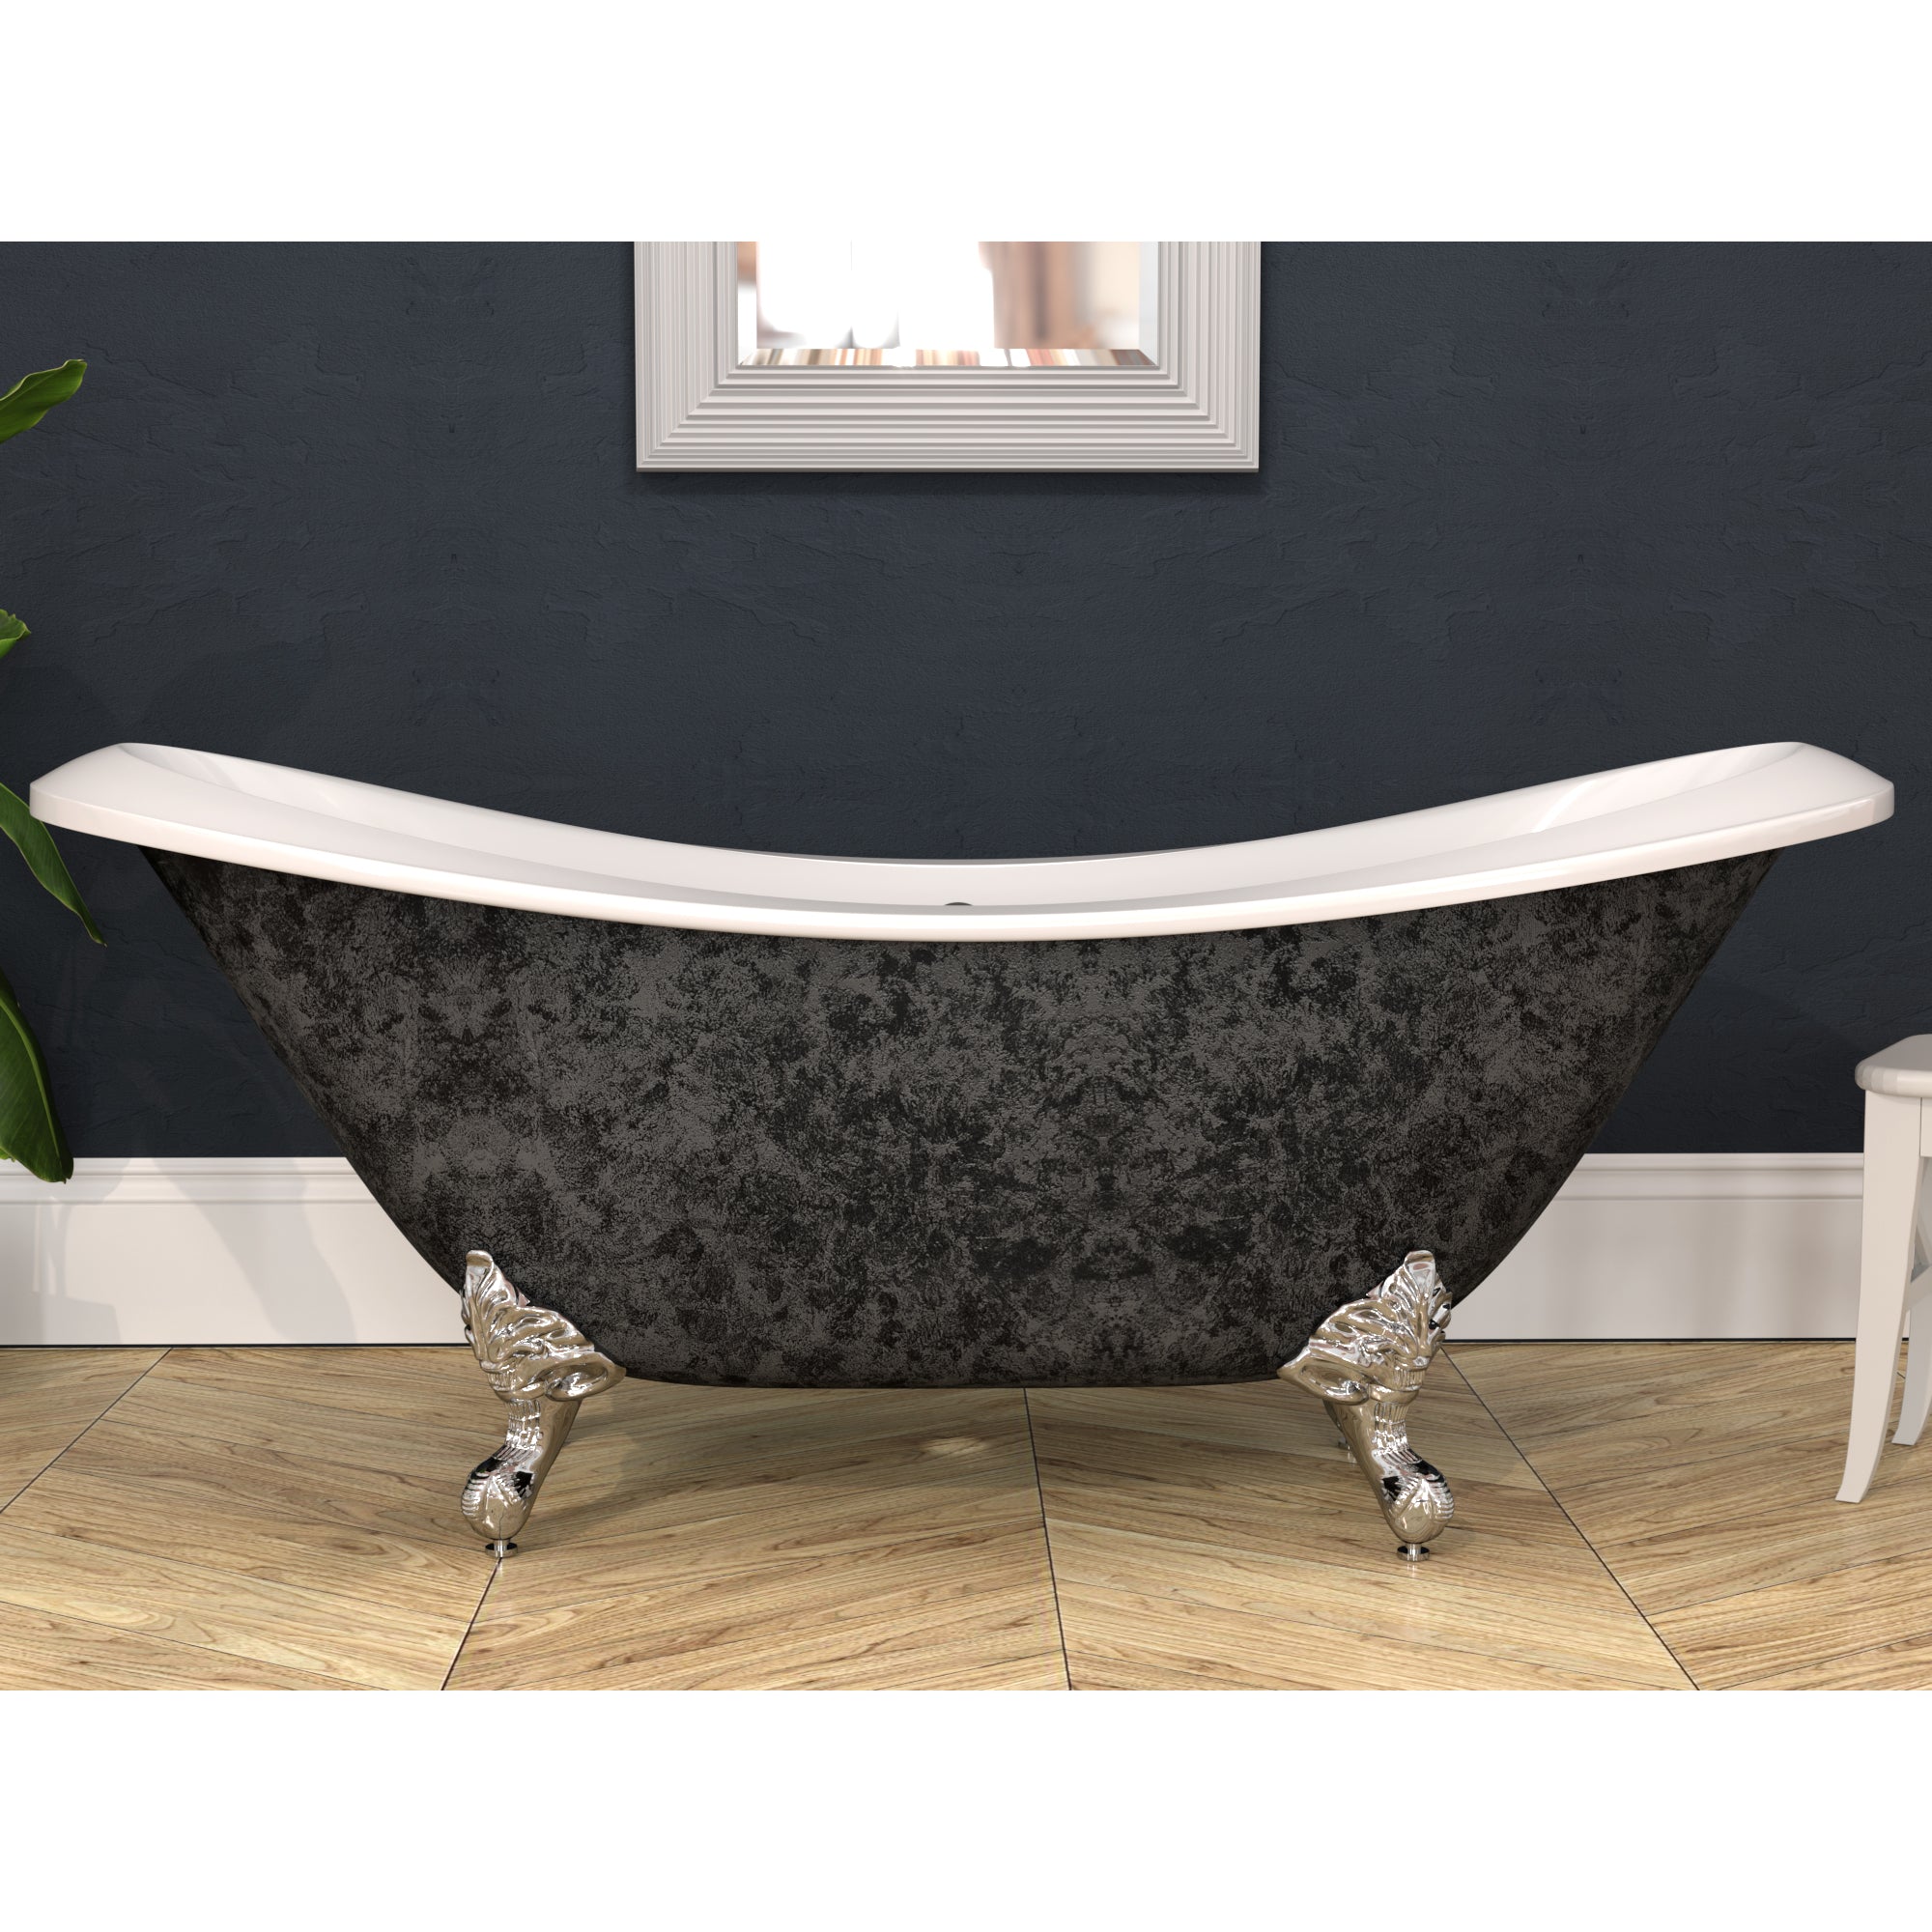 Cambridge Plumbing Extra Wide Double Slipper Hand Painted Scorched Platinum Acrylic Clawfoot Tub Hand Painted Faux Scorched Platinum Exterior, Feet (Brushed Nickel) and No Faucet Holes ADESXL-NH-SP - Vital Hydrotherapy